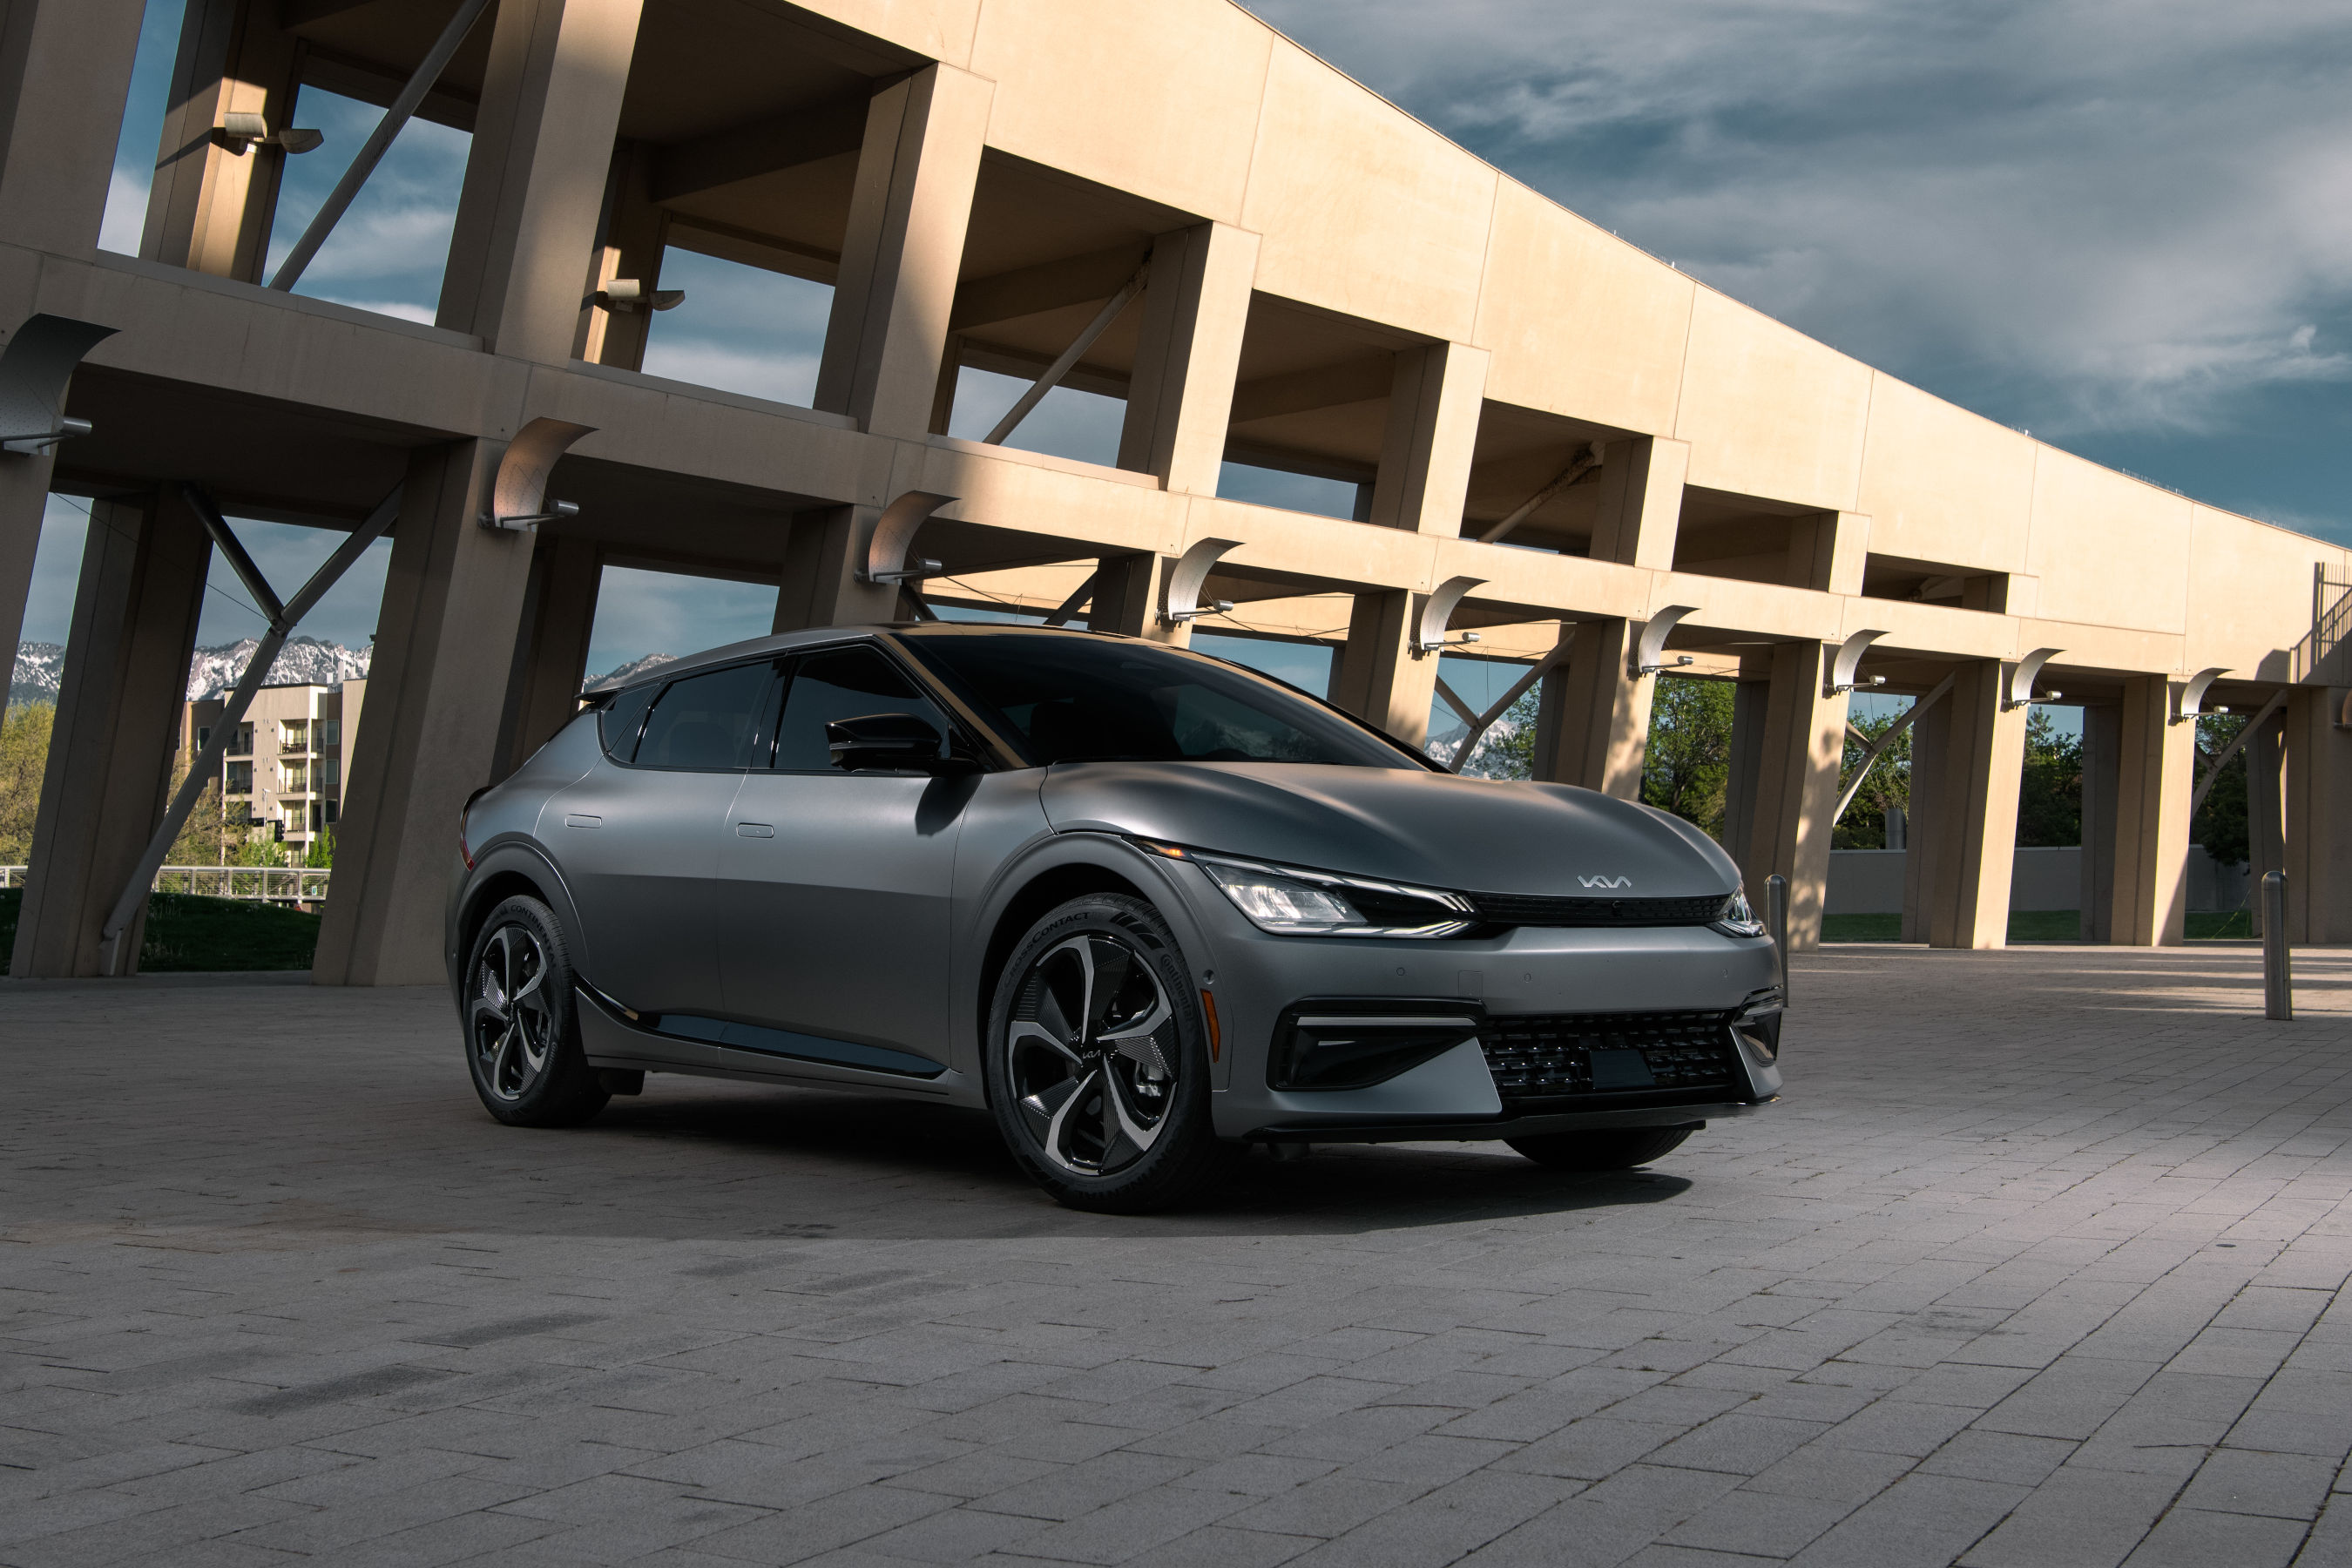 All-new EV6 is Kia’s first dedicated EV and signals the beginning of the brand’s transformative ‘Plan S’ electrification strategy.